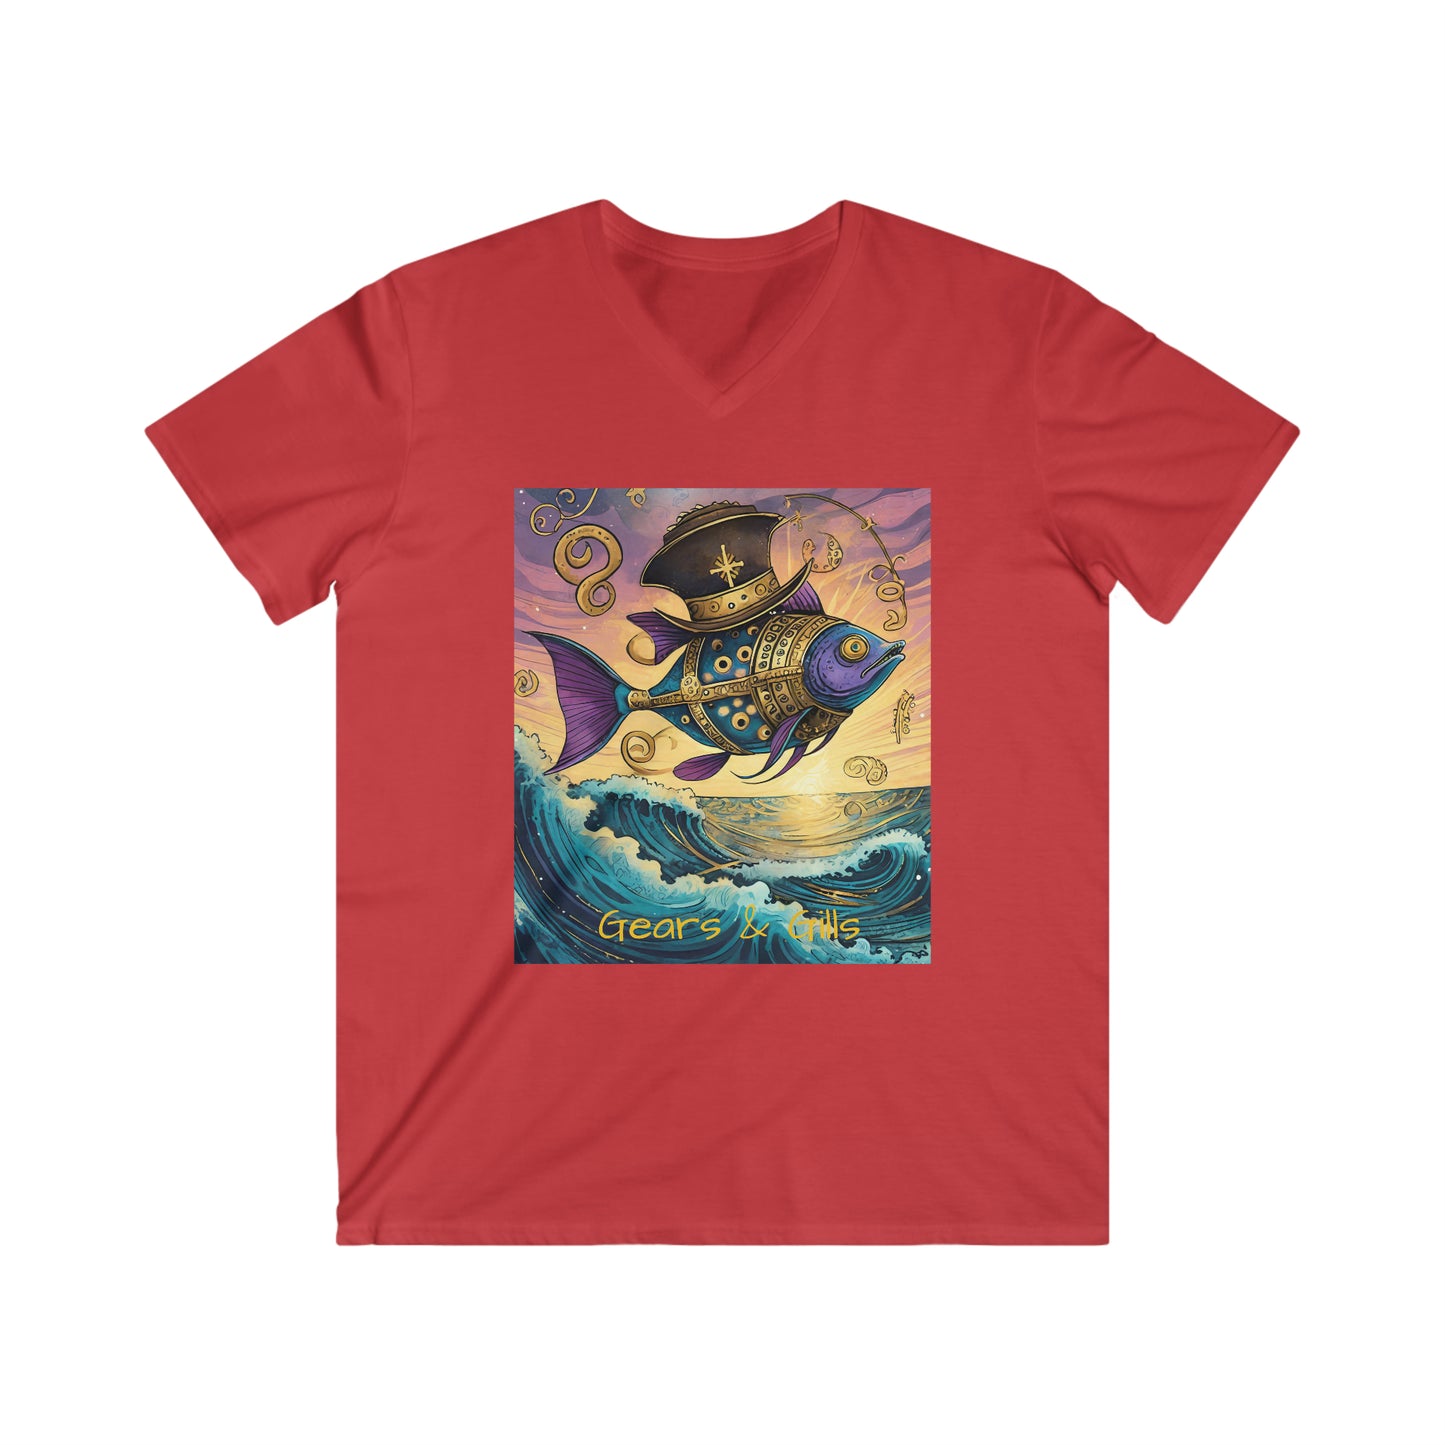 Unisex Adult Fitted V-Neck Short Sleeve Tee Gear & Gills: A Steampunk gematria Fishery